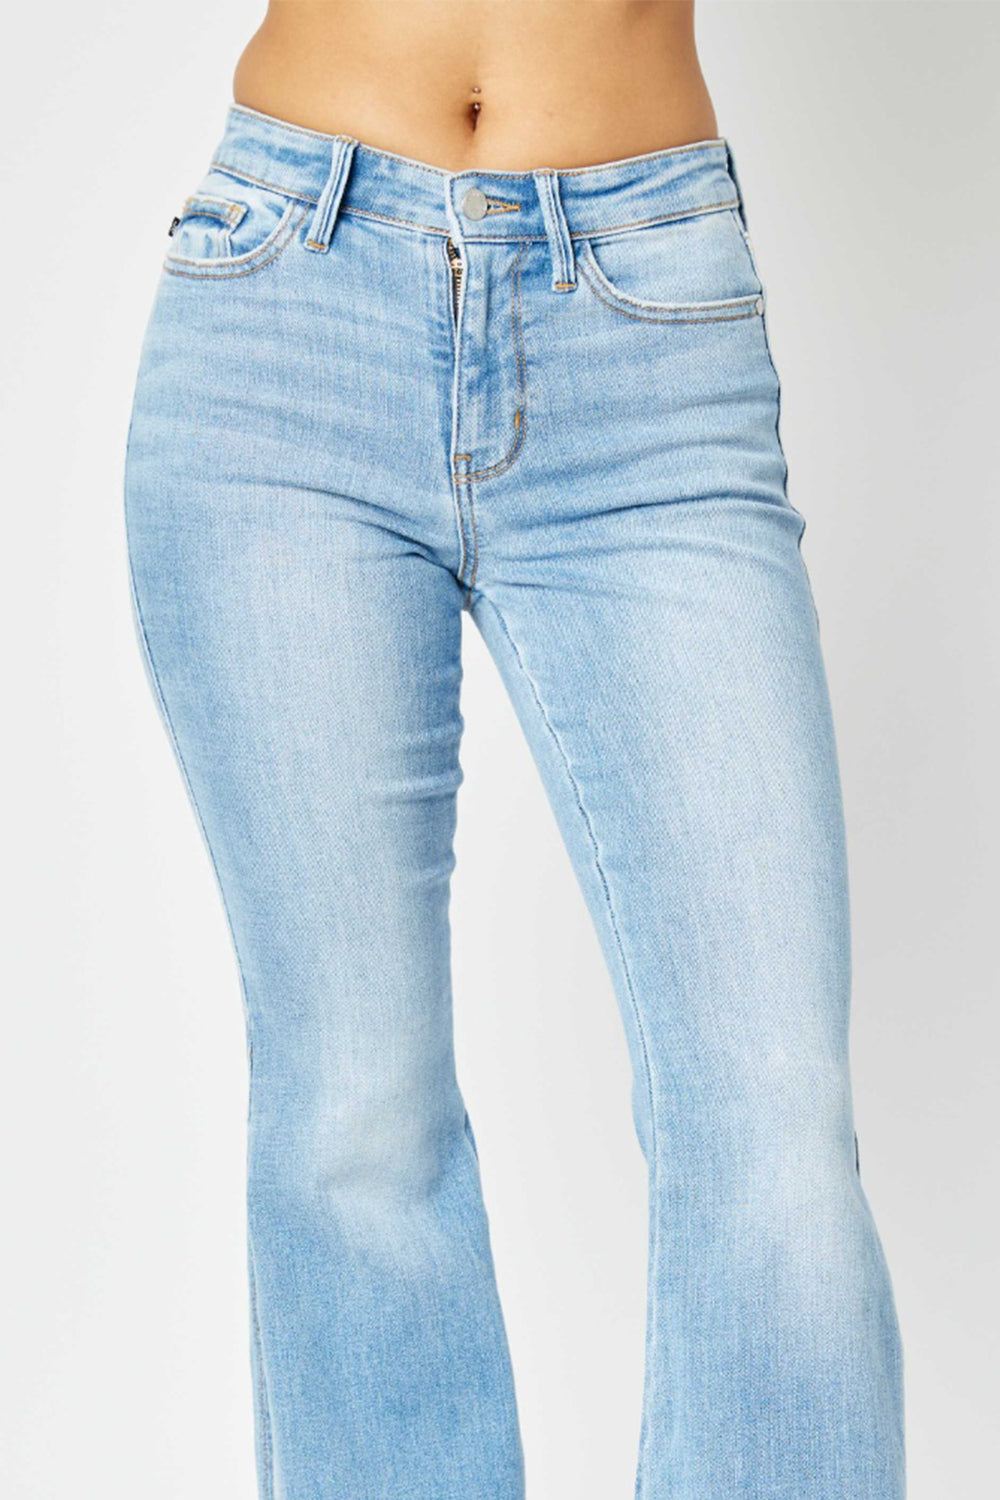 Judy Blue Mid Rise Flare Jeans - Inspired Eye Boutique